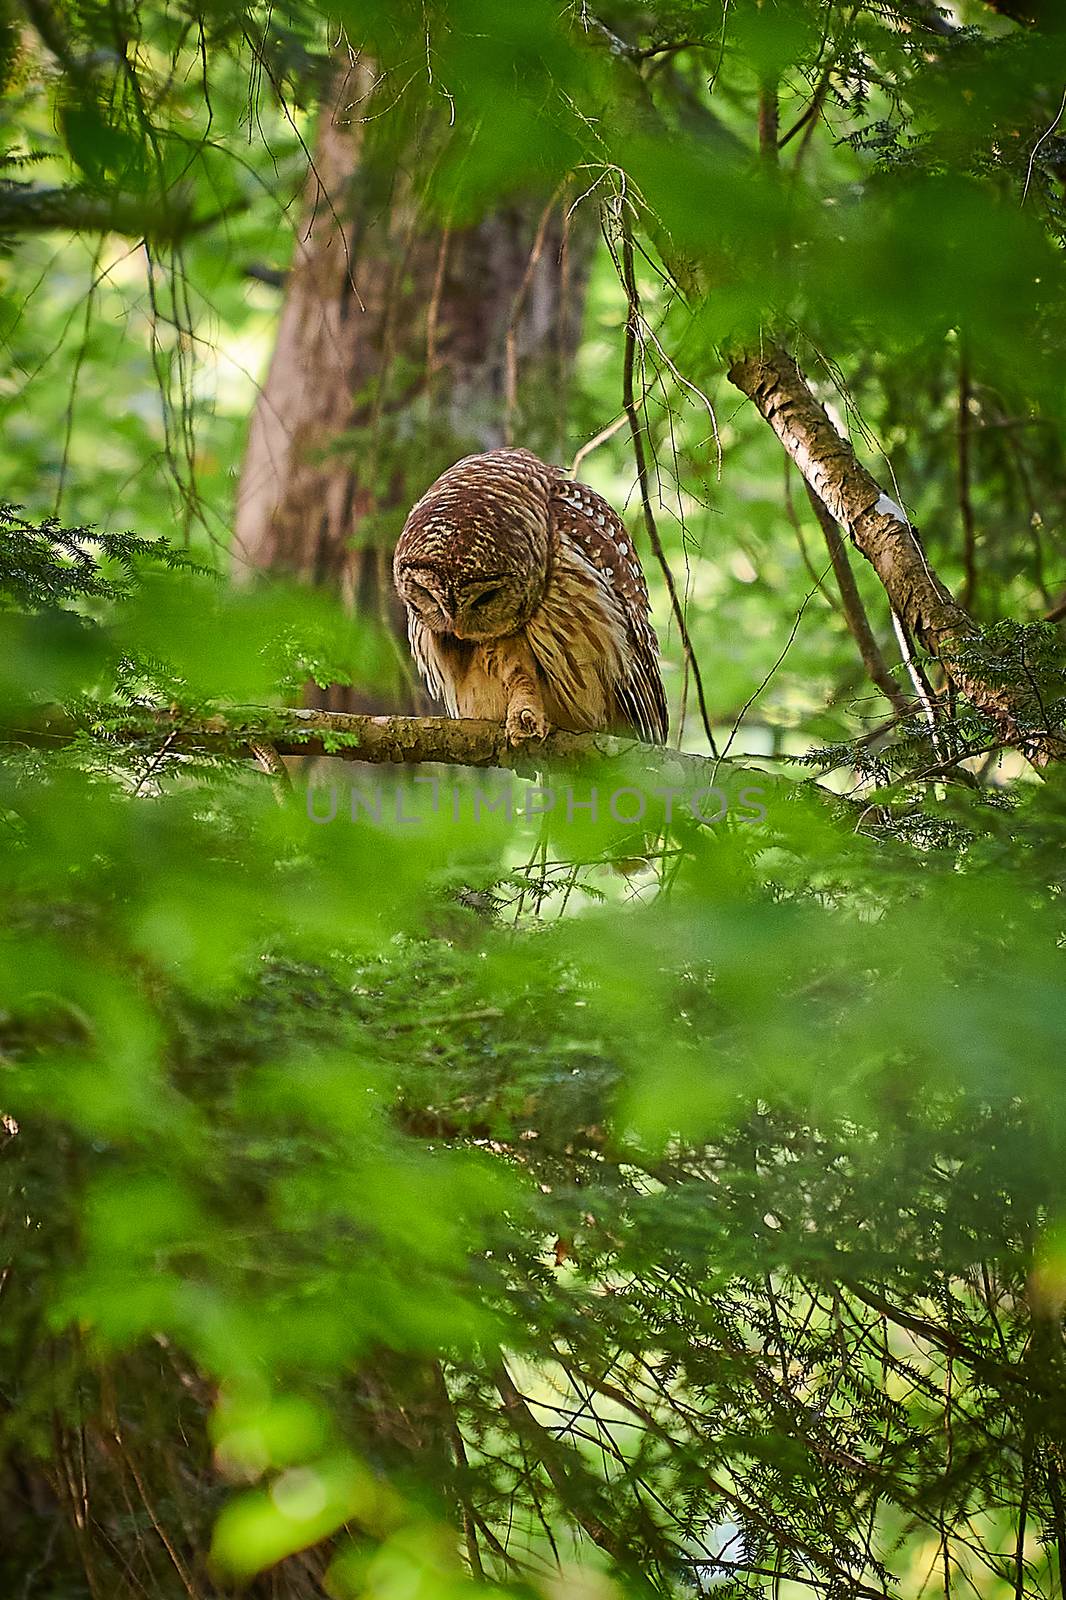 Adult Barred Owl sitting in a tree looking a potential pray. by patrickstock